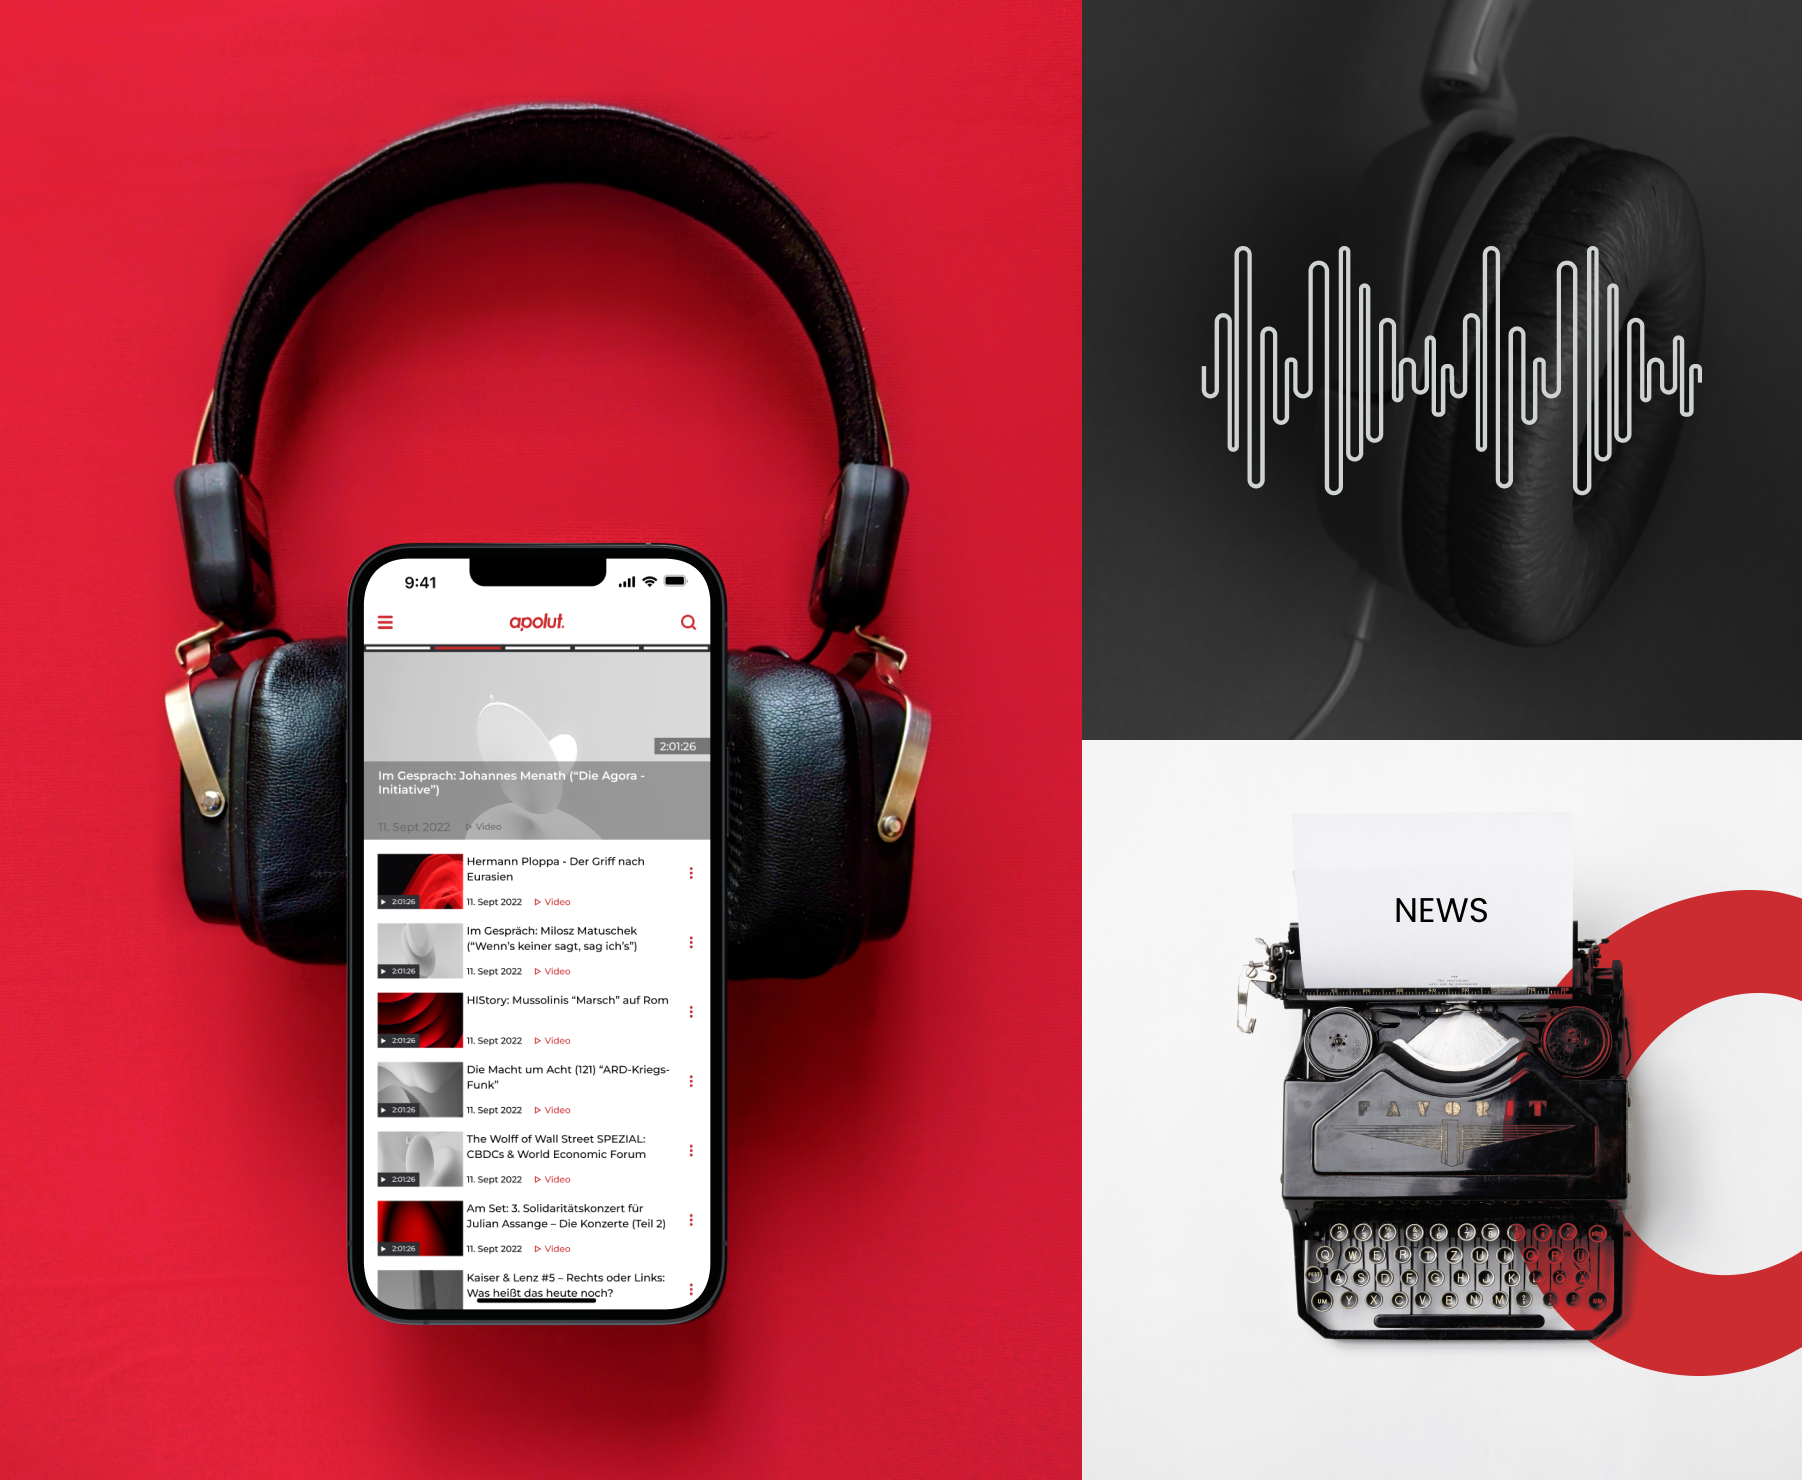 Apolut media aggregator offers multiple forms of presenting latest news - podcasts, videos and articles - collected from various sources on one platform!